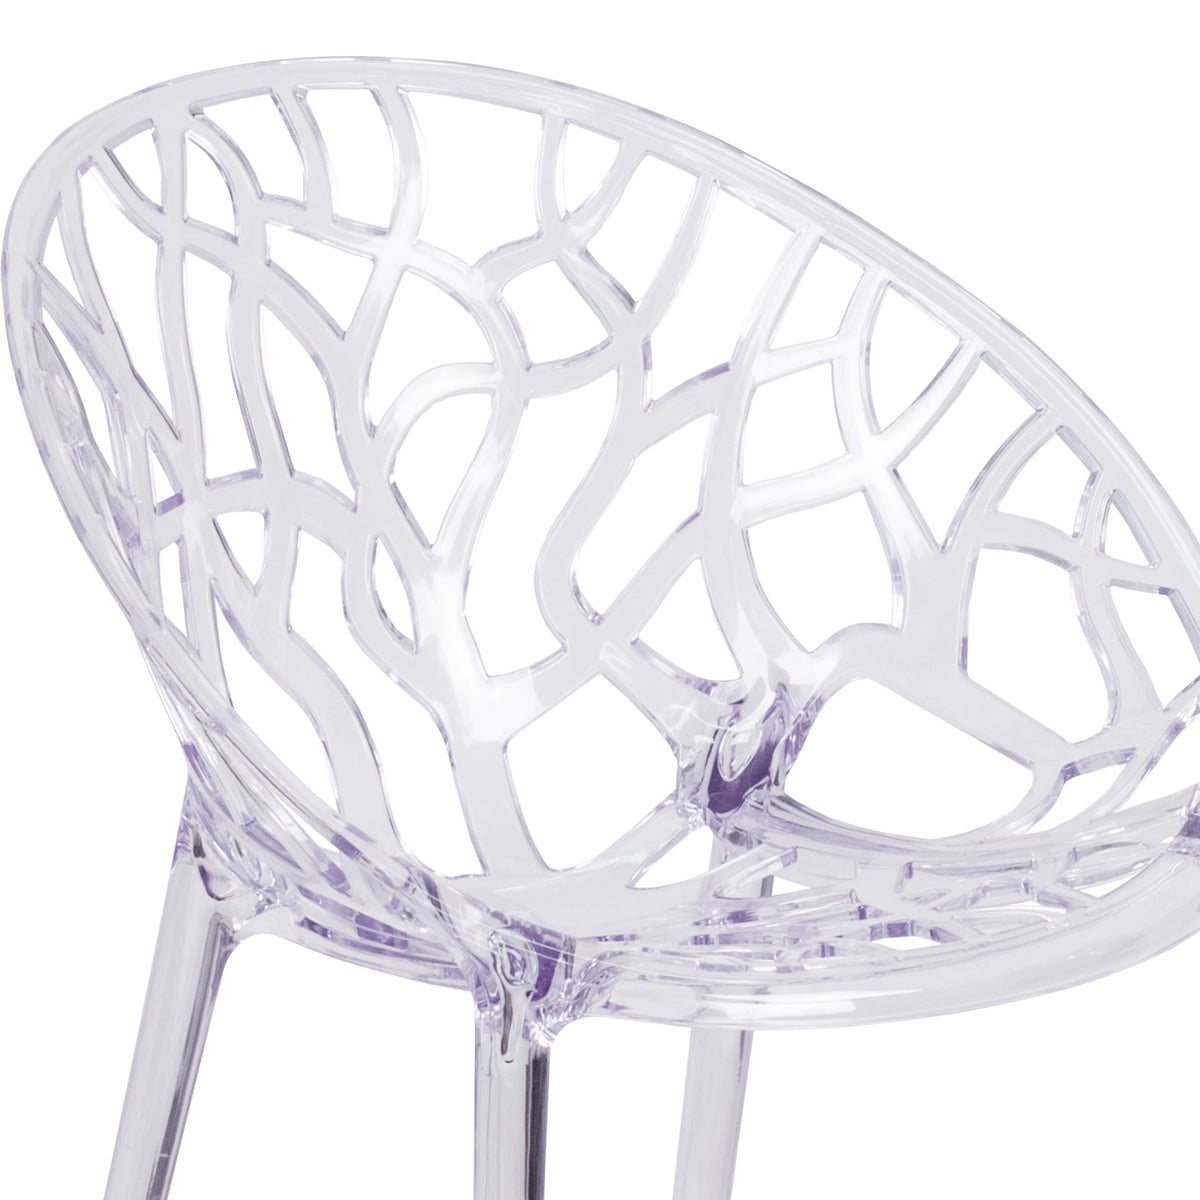 Transparent Oval Shaped Stacking Side Chair with Artistic Pattern Design